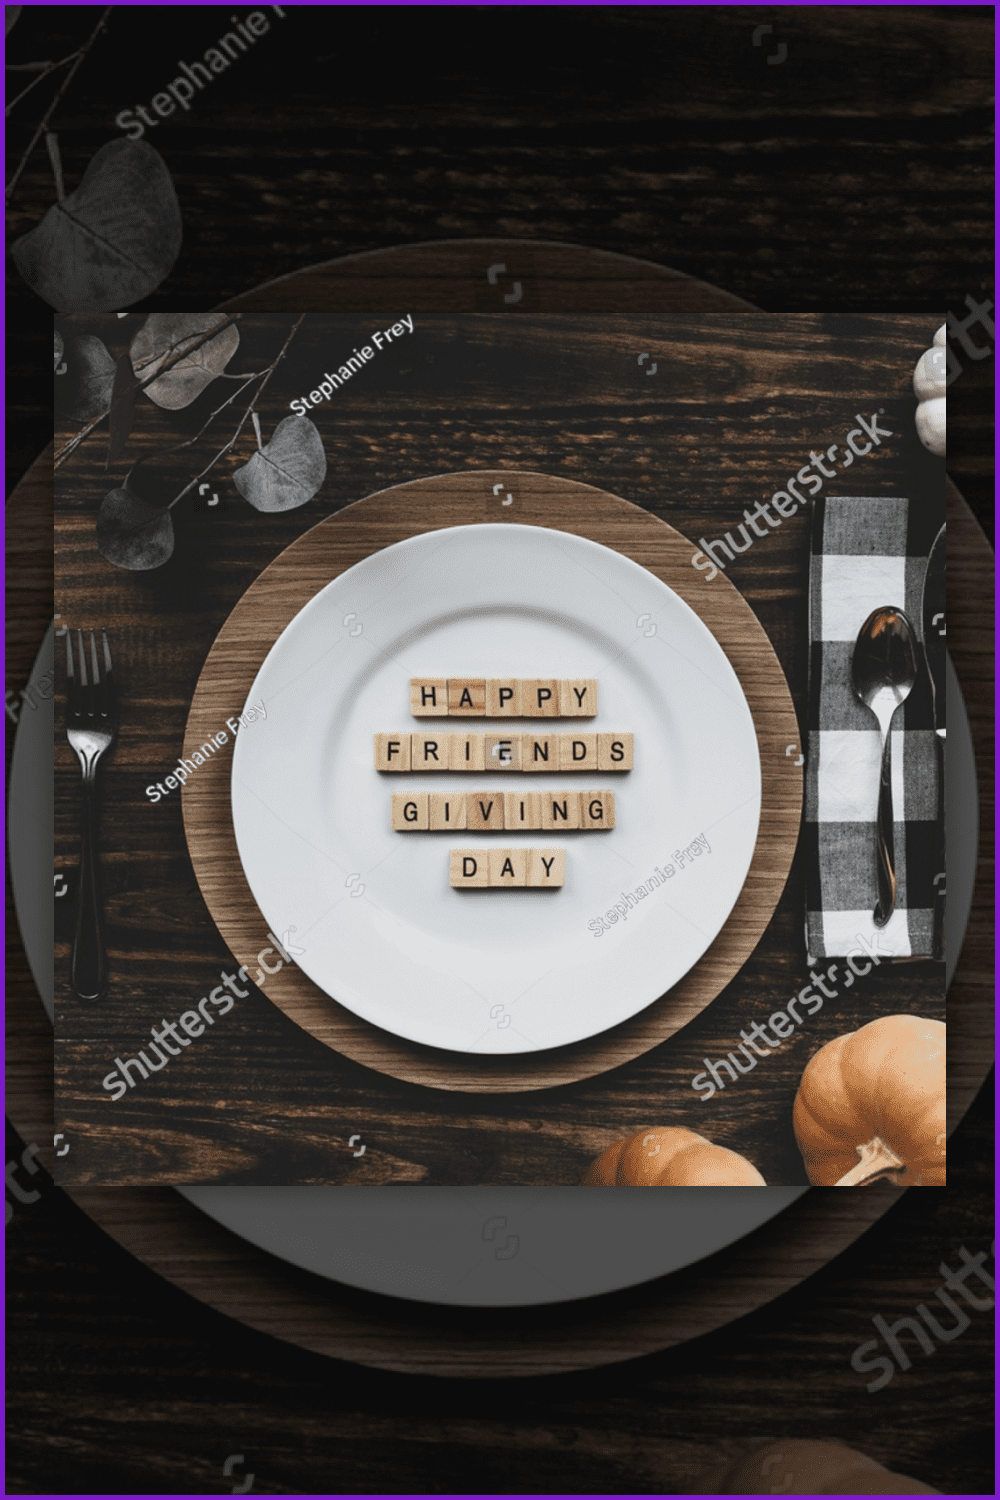 Photo of the table with a “Happy Friendsgiving Day” message spelled out with wood block letters.